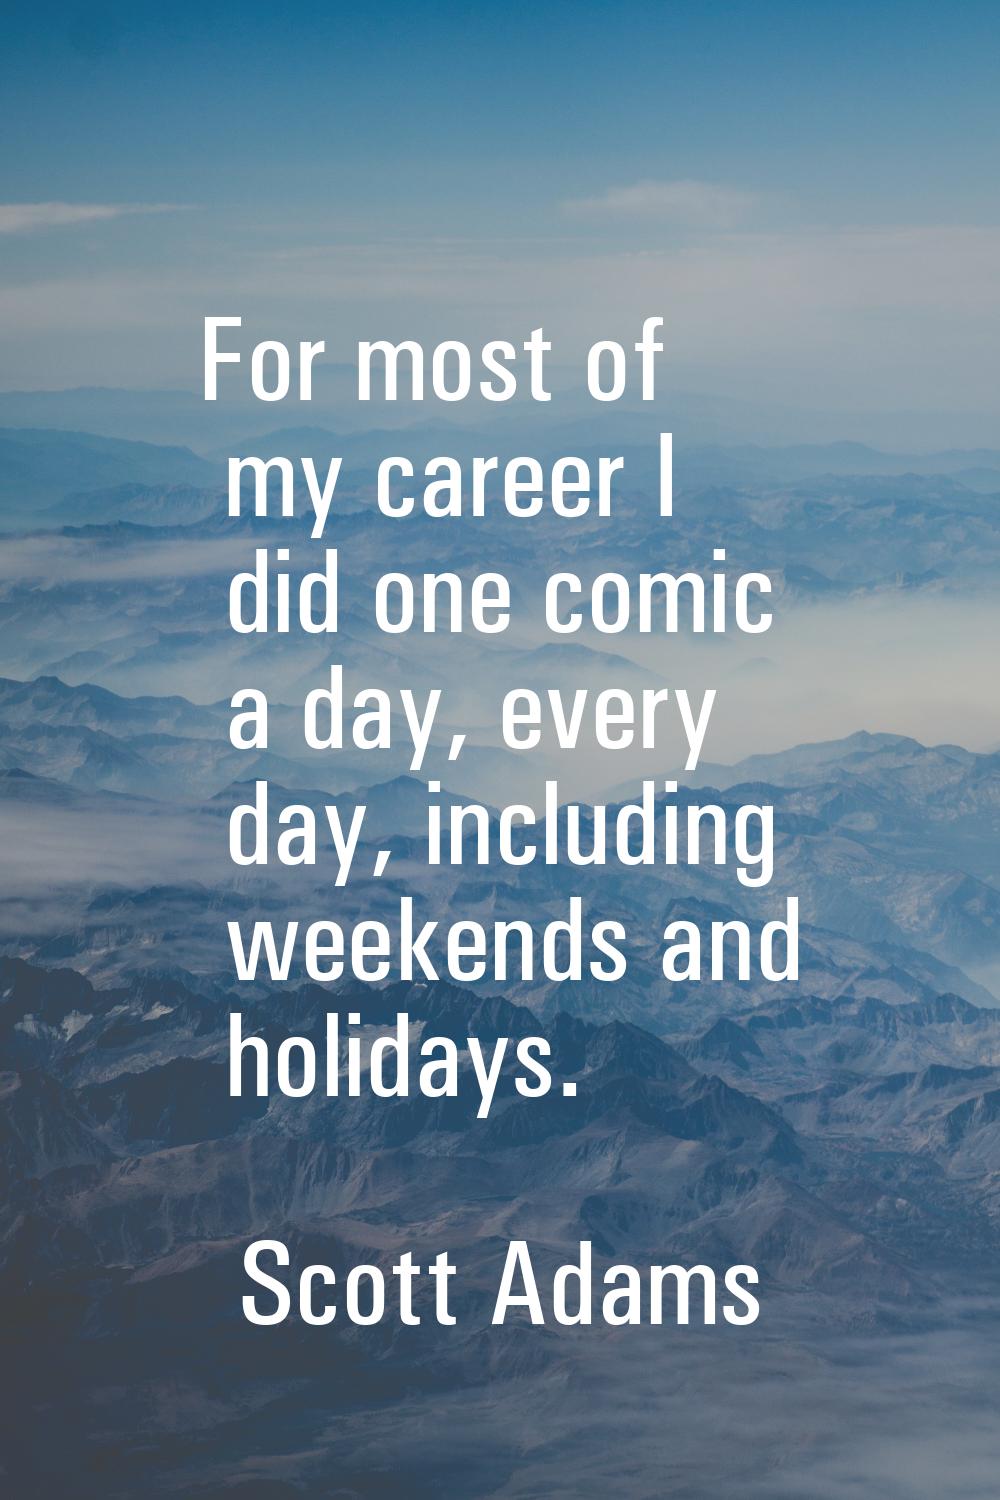 For most of my career I did one comic a day, every day, including weekends and holidays.